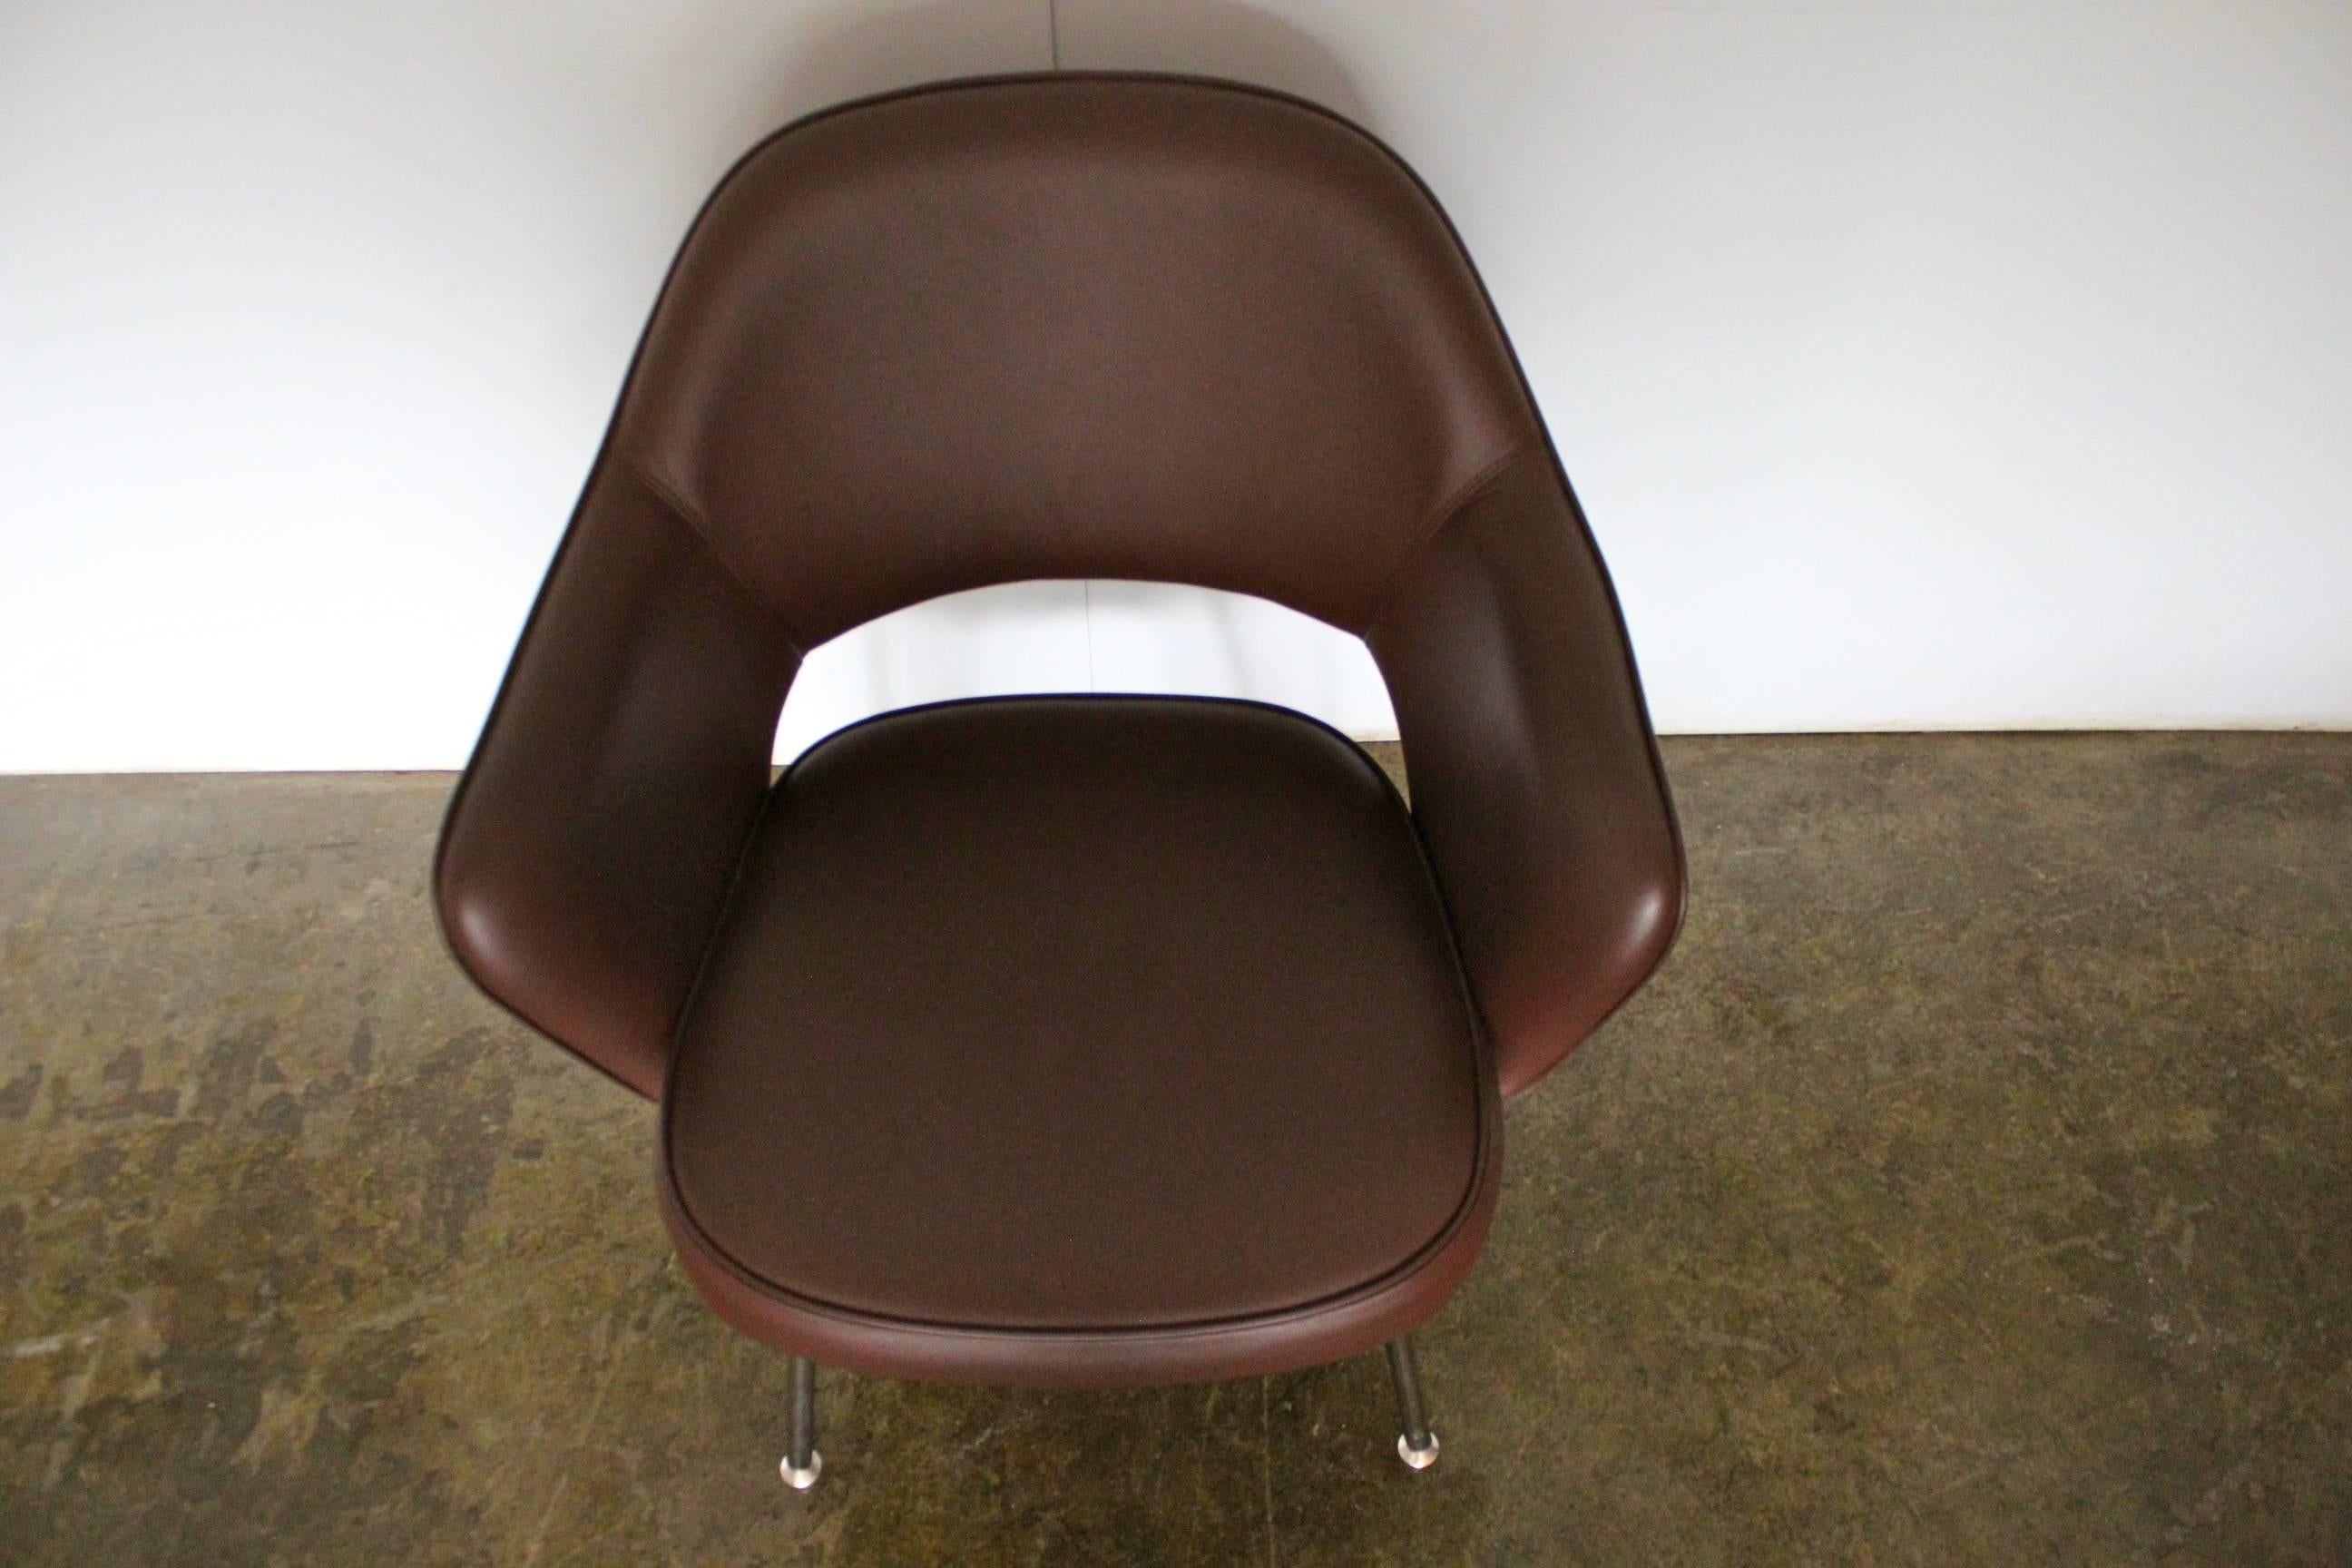 Knoll Studio “Saarinen Executive” Armchair in “Volo” Brown Leather In Excellent Condition For Sale In Barrowford, GB